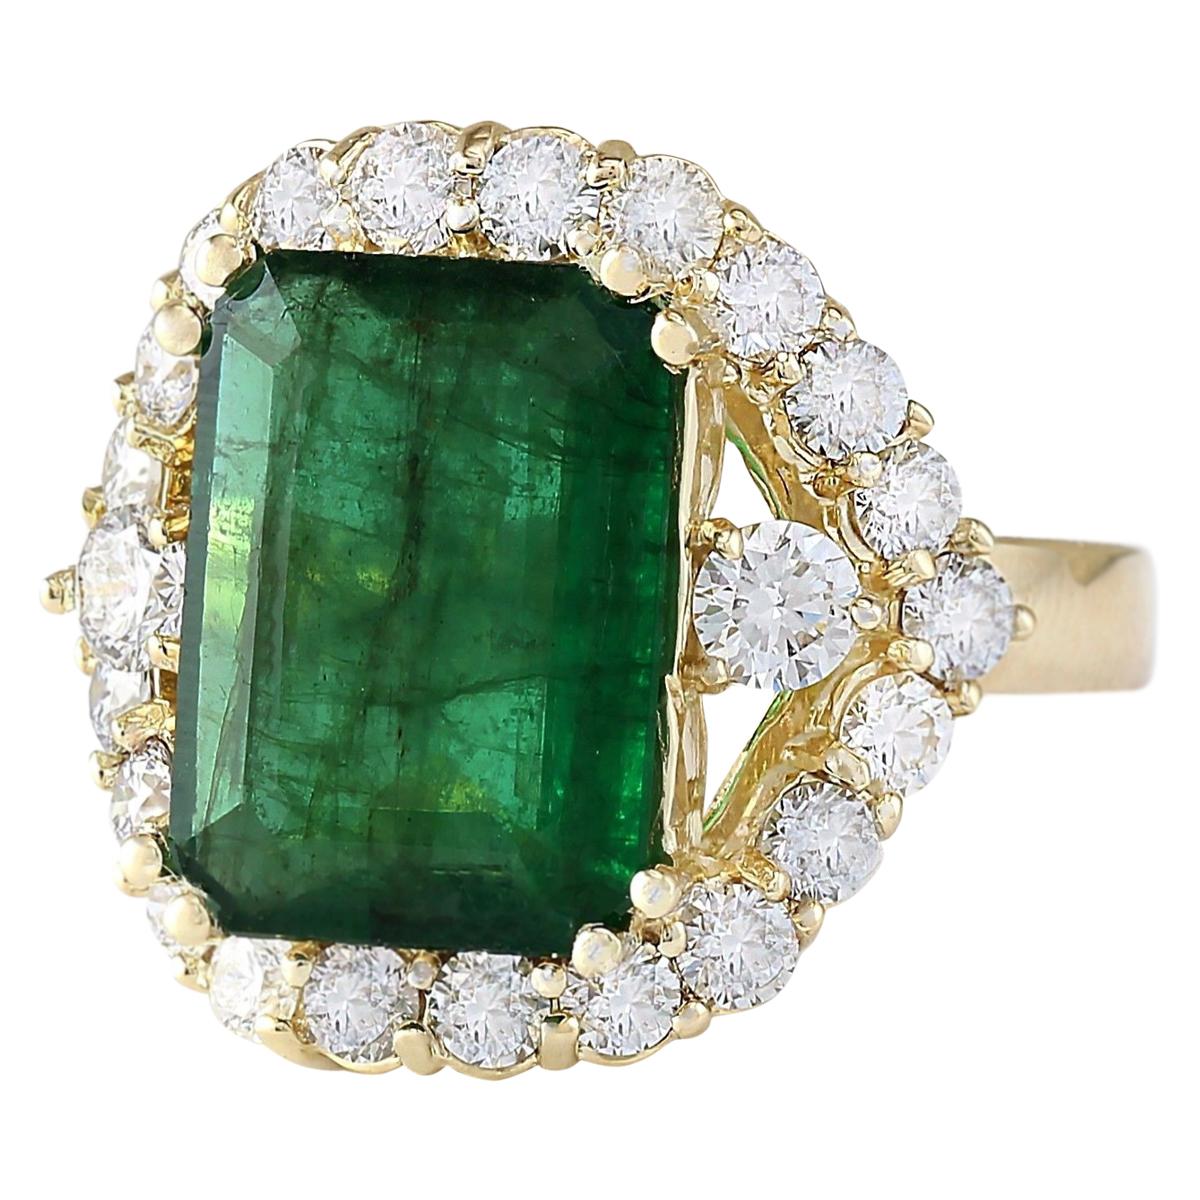 6.40 Carat Emerald 14 Karat Yellow Gold Diamond Ring
Stamped: 14K Yellow Gold
Total Ring Weight: 7.6 Grams
Total  Emerald Weight is 4.75 Carat (Measures: 14.00x10.00 mm)
Color: Green
Total  Diamond Weight is 1.65 Carat
Color: F-G, Clarity: